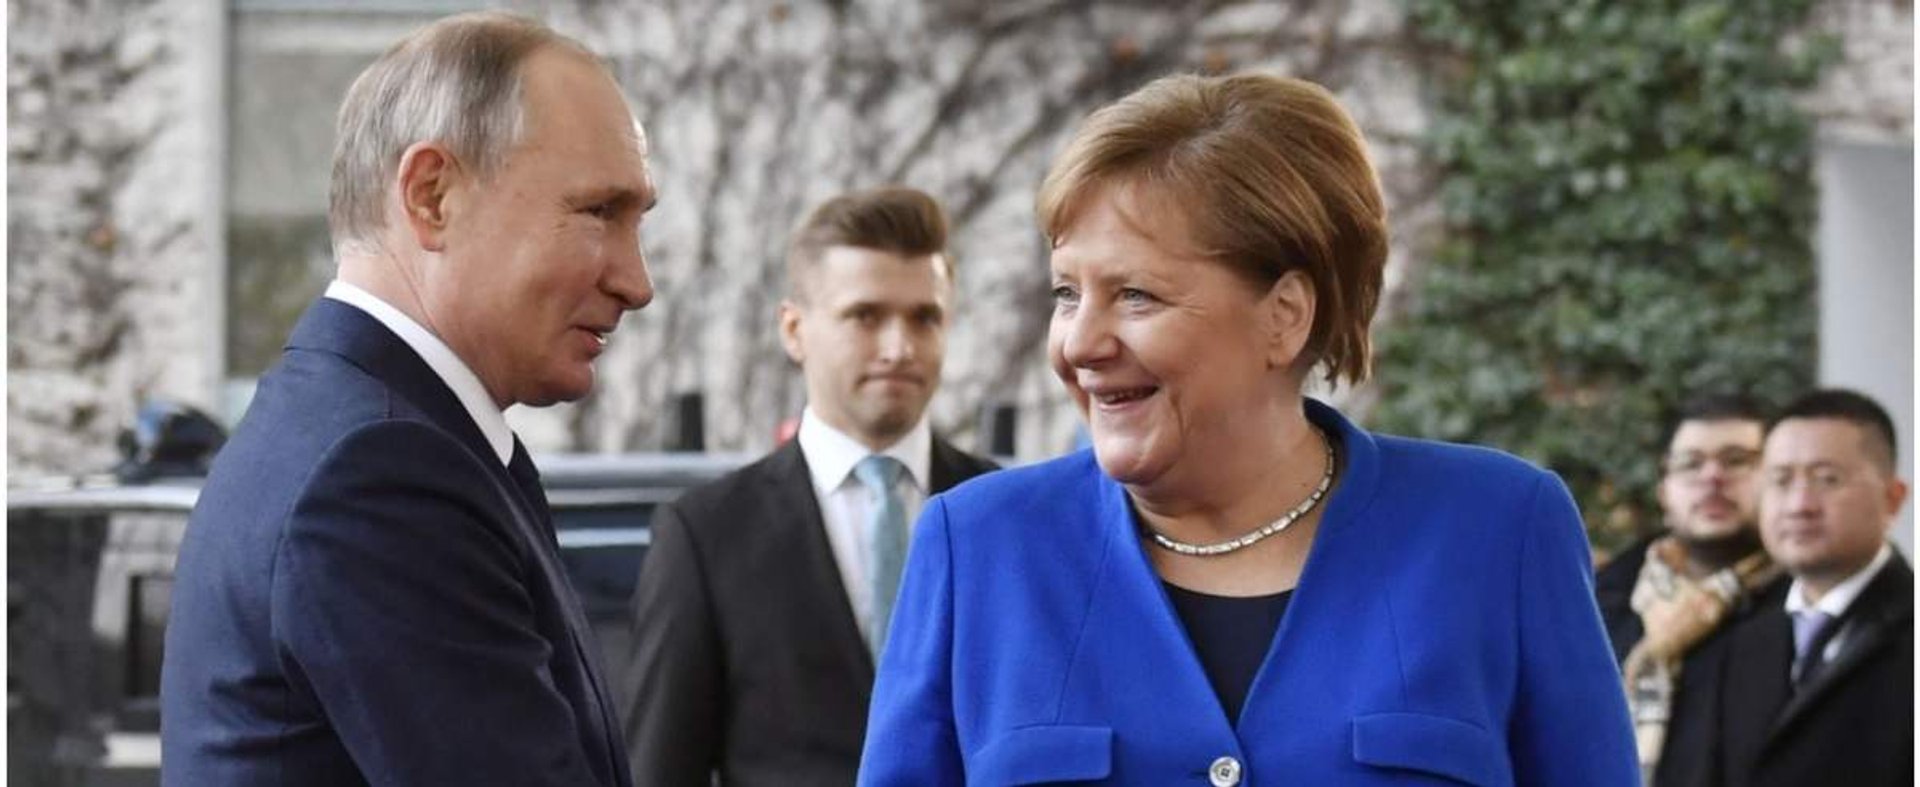 German Chancellor Angela Merkel shakes hands with Russian President Vladimir Putin upon his arrival to attend the Peace summit on Libya at the Chancellery in Berlin on January 19, 2020. - World leaders gather in Berlin on January 19, 2020 to make a fresh 